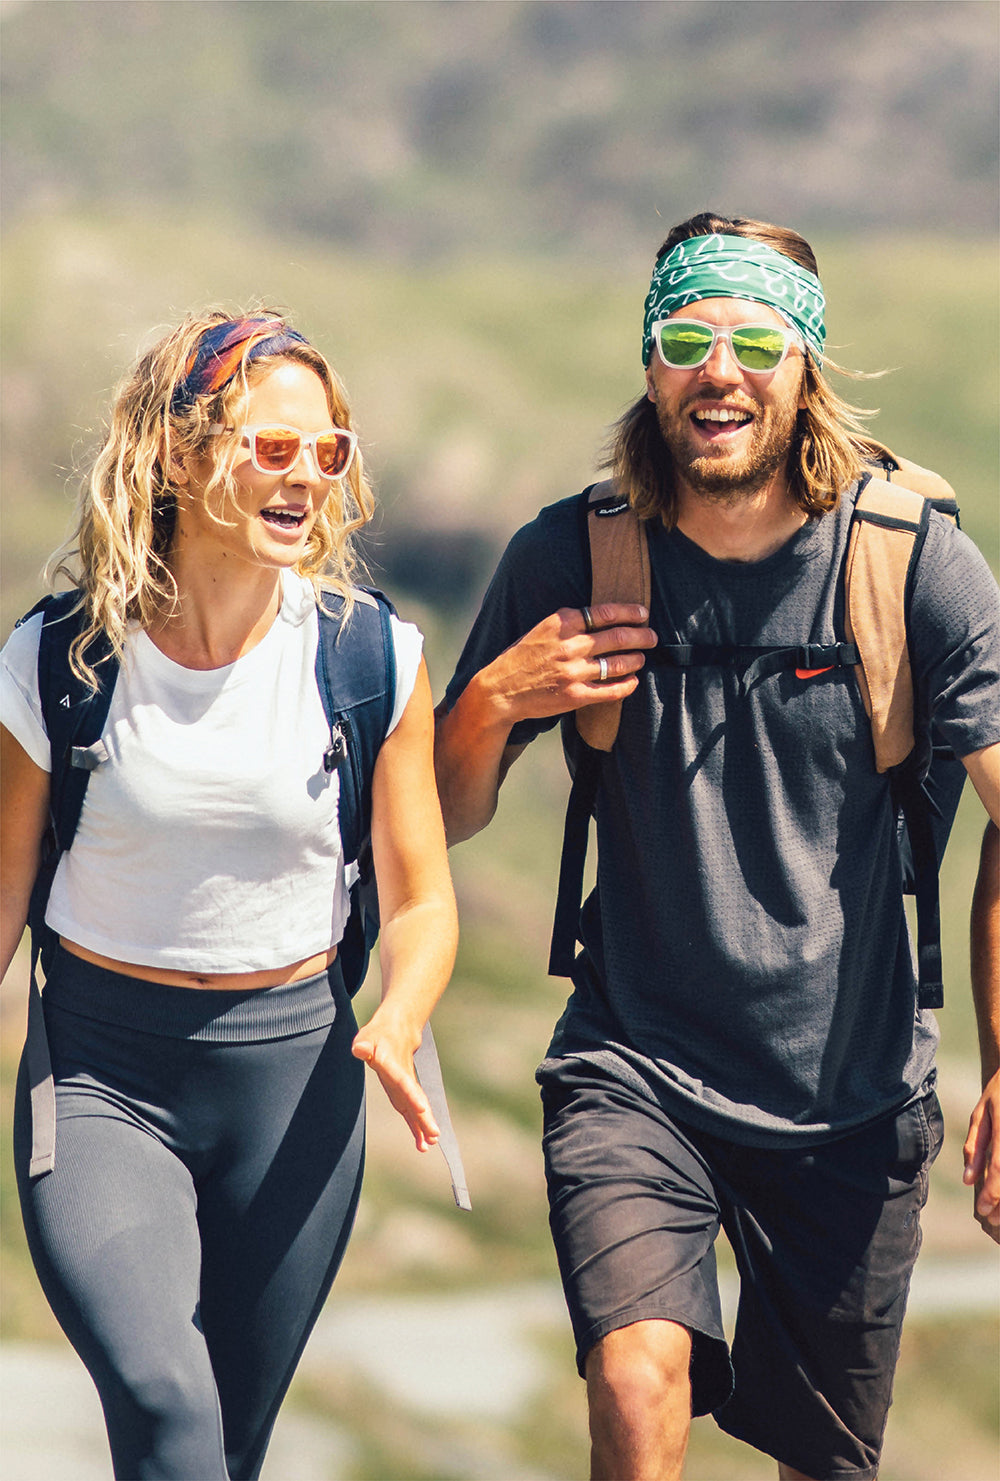 Non-Slip, Recycled Shades Designed for Hiking